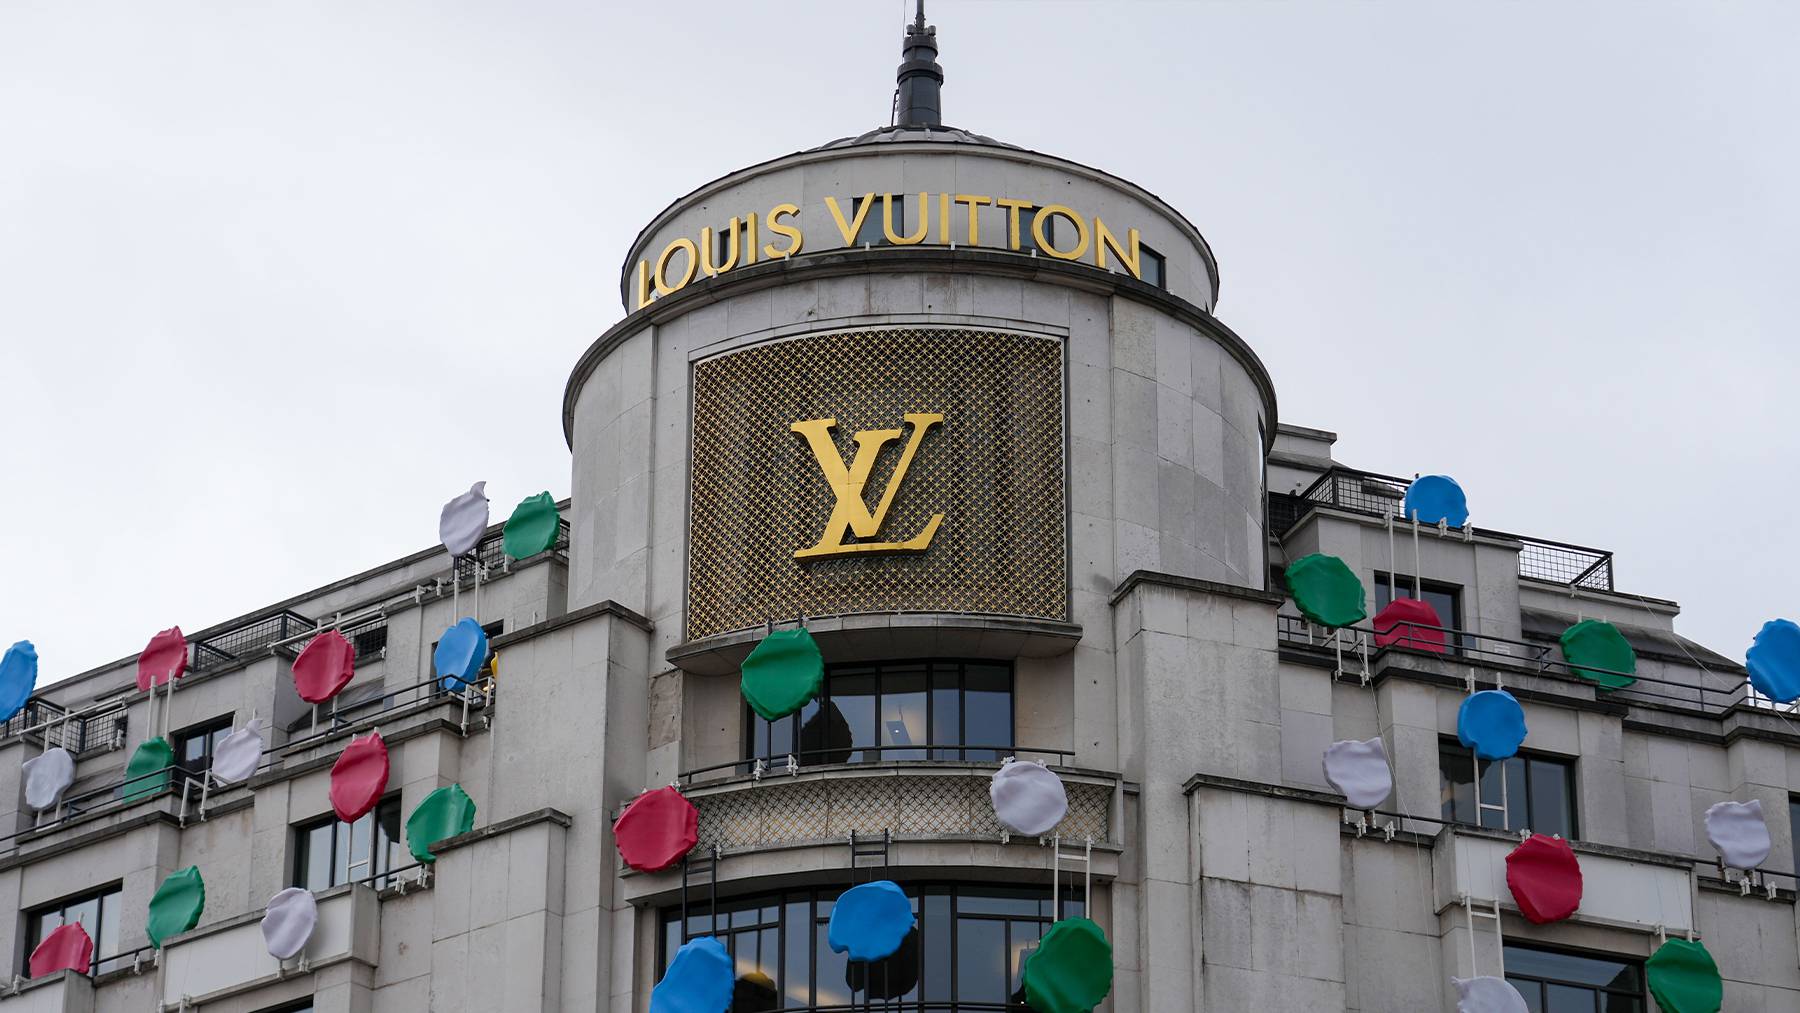 A Yayoi Kusama sculpture is displayed on the top of the Louis Vuitton's Champs Elysees store.